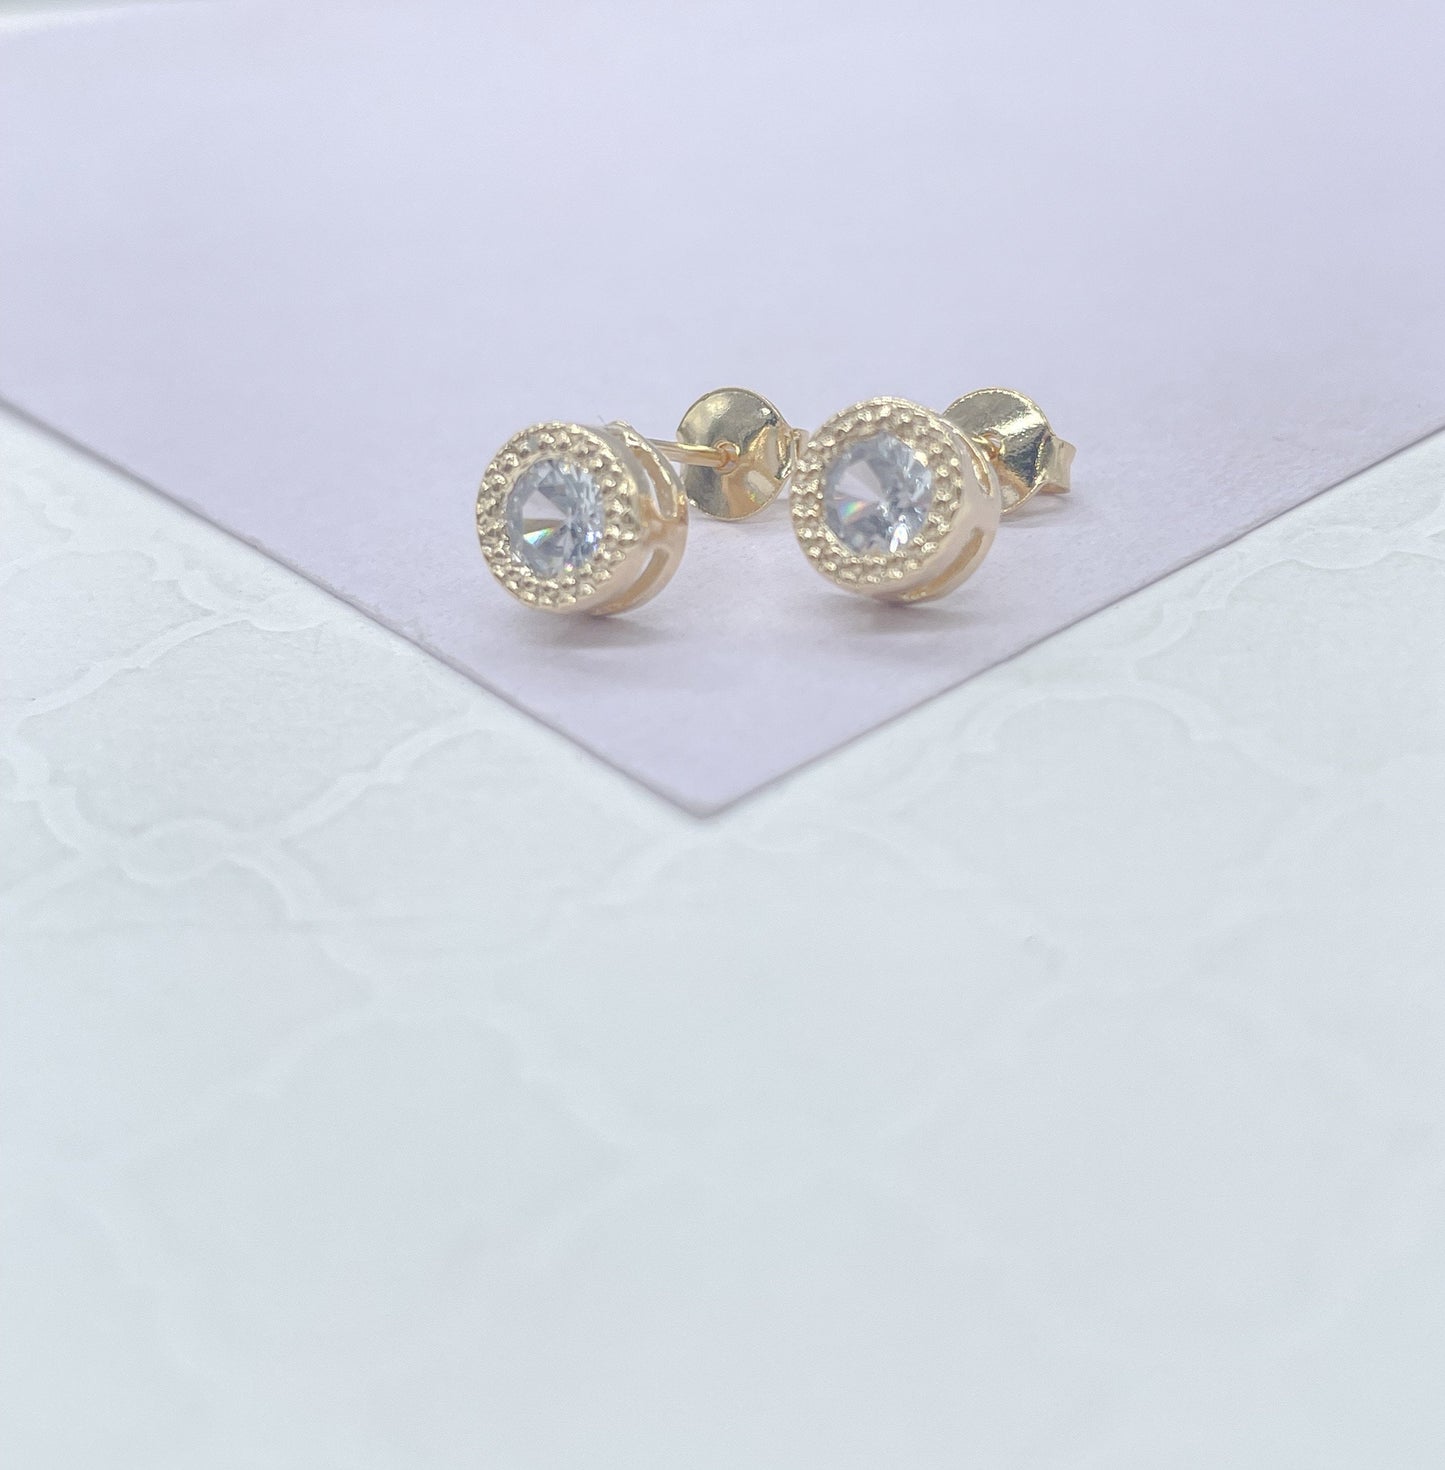 18k Gold Filled 7mm Round Princess Cut Embezzled Stud Earring, Dainty Studs, Gold-filled Jewlery.